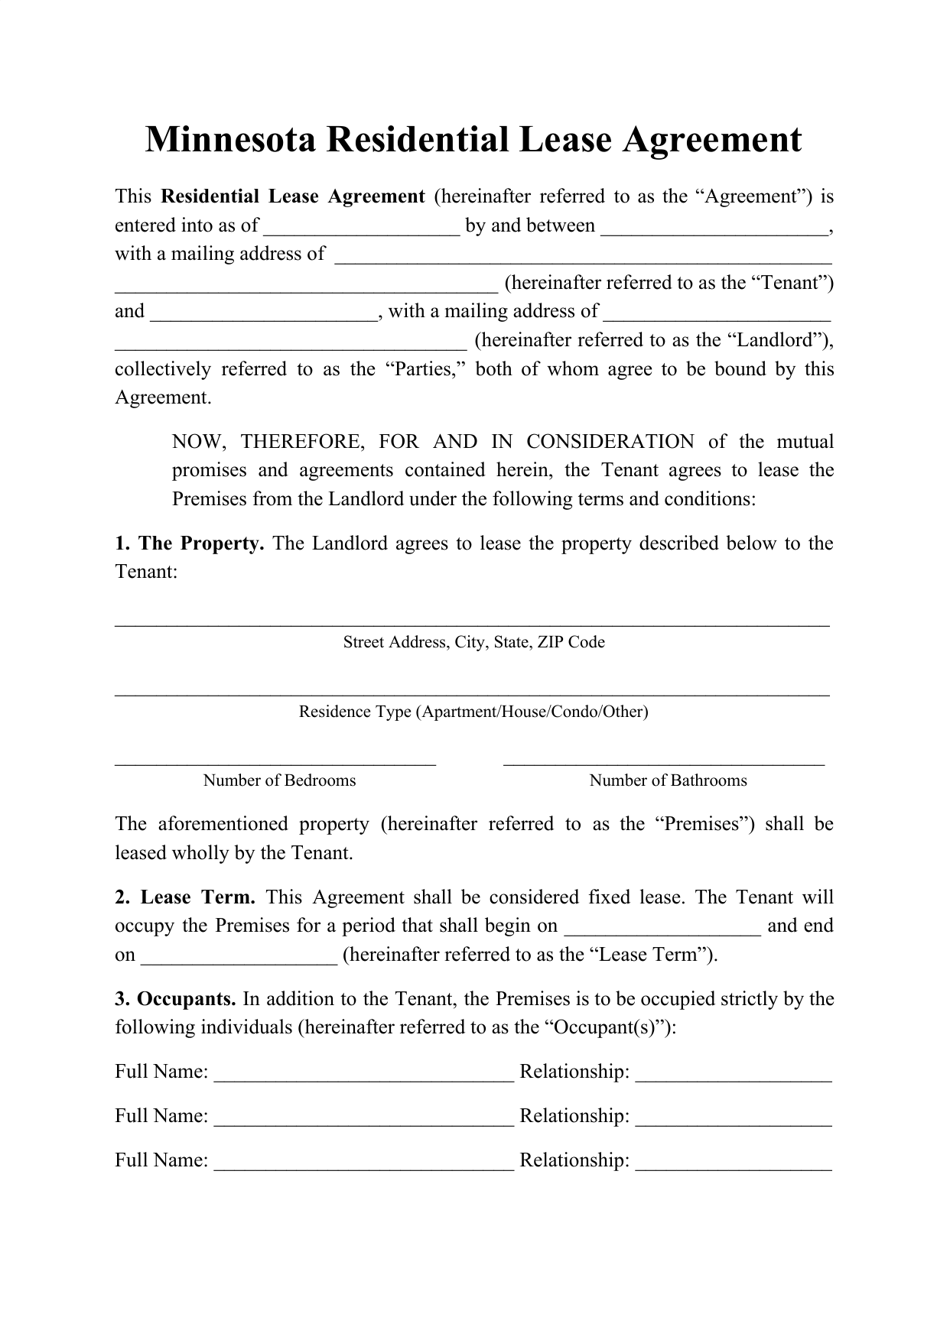 Residential Lease Agreement Template - Minnesota, Page 1